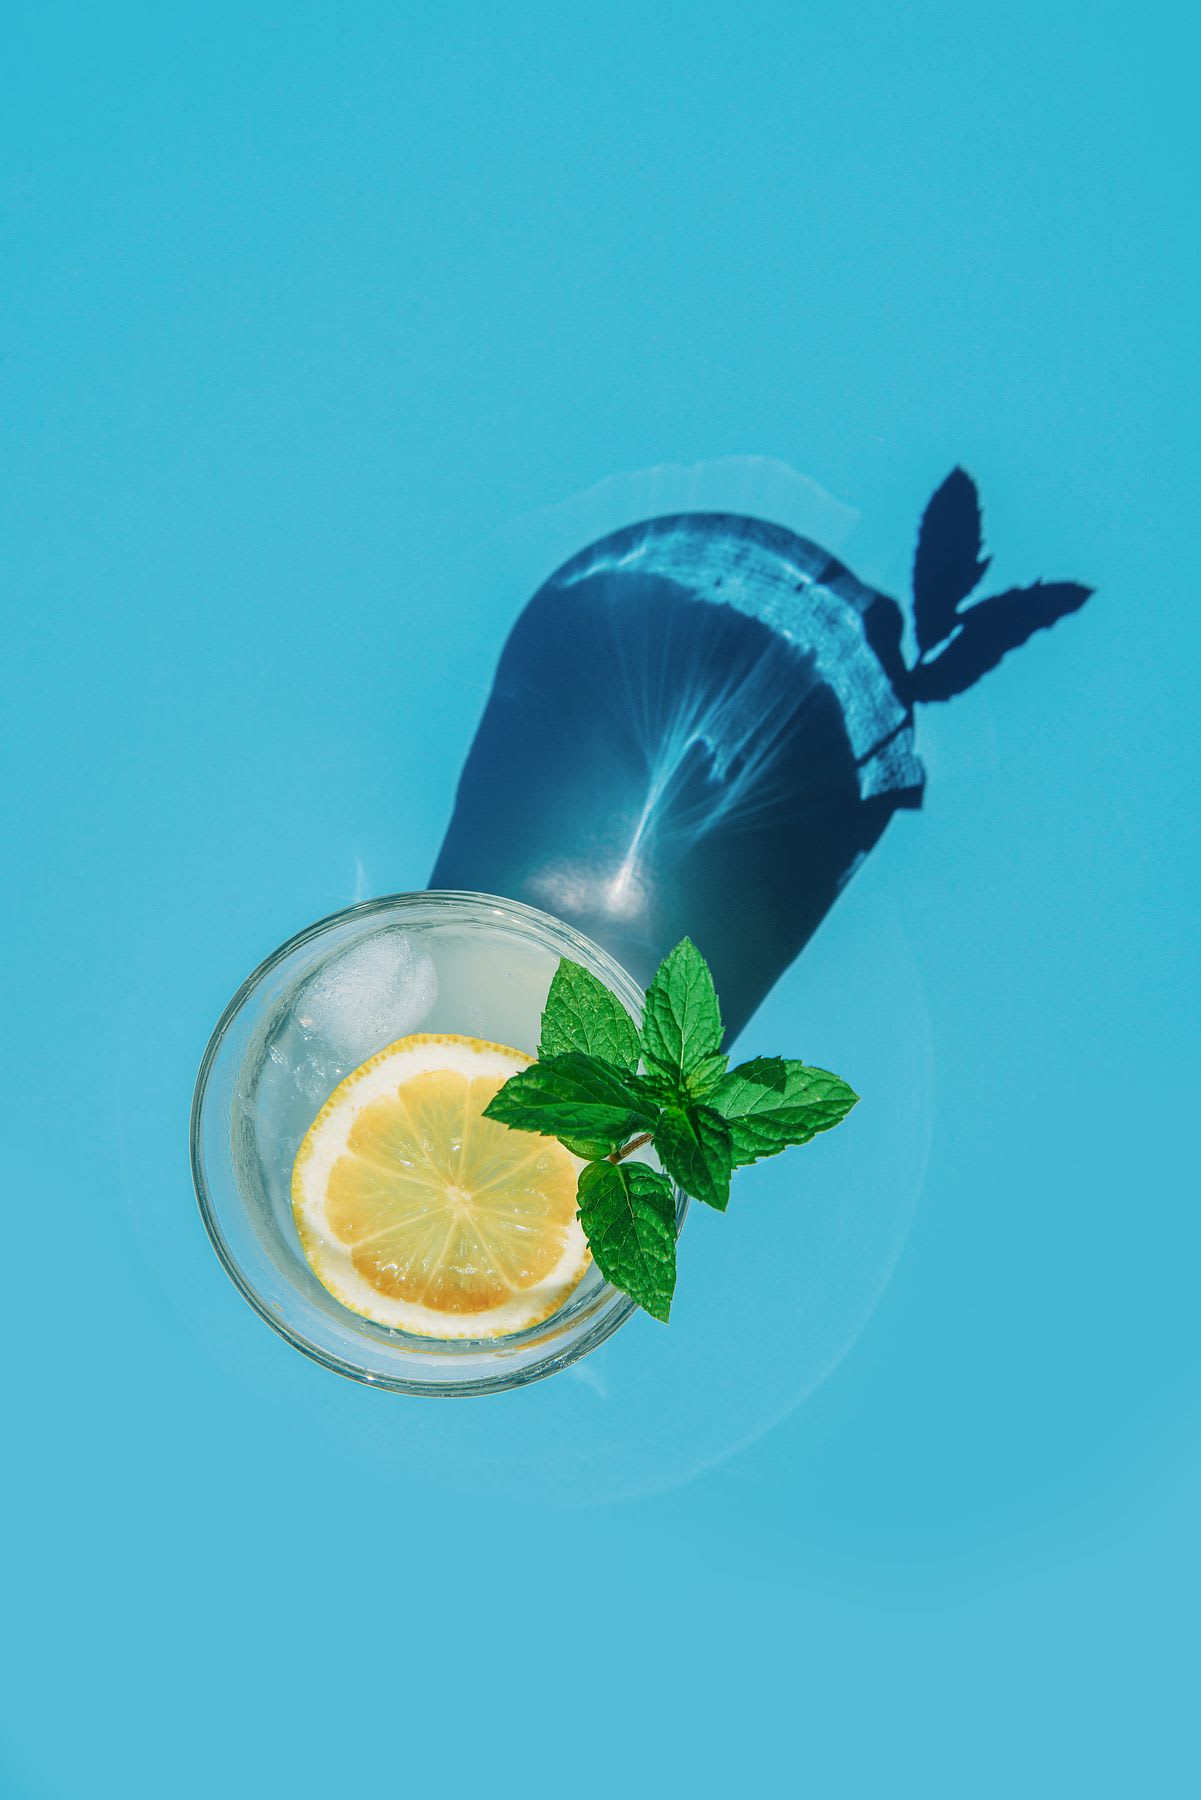 Drink with ice, a slice of lemon, and fresh mint leaves, casting a shadow on a blue background.